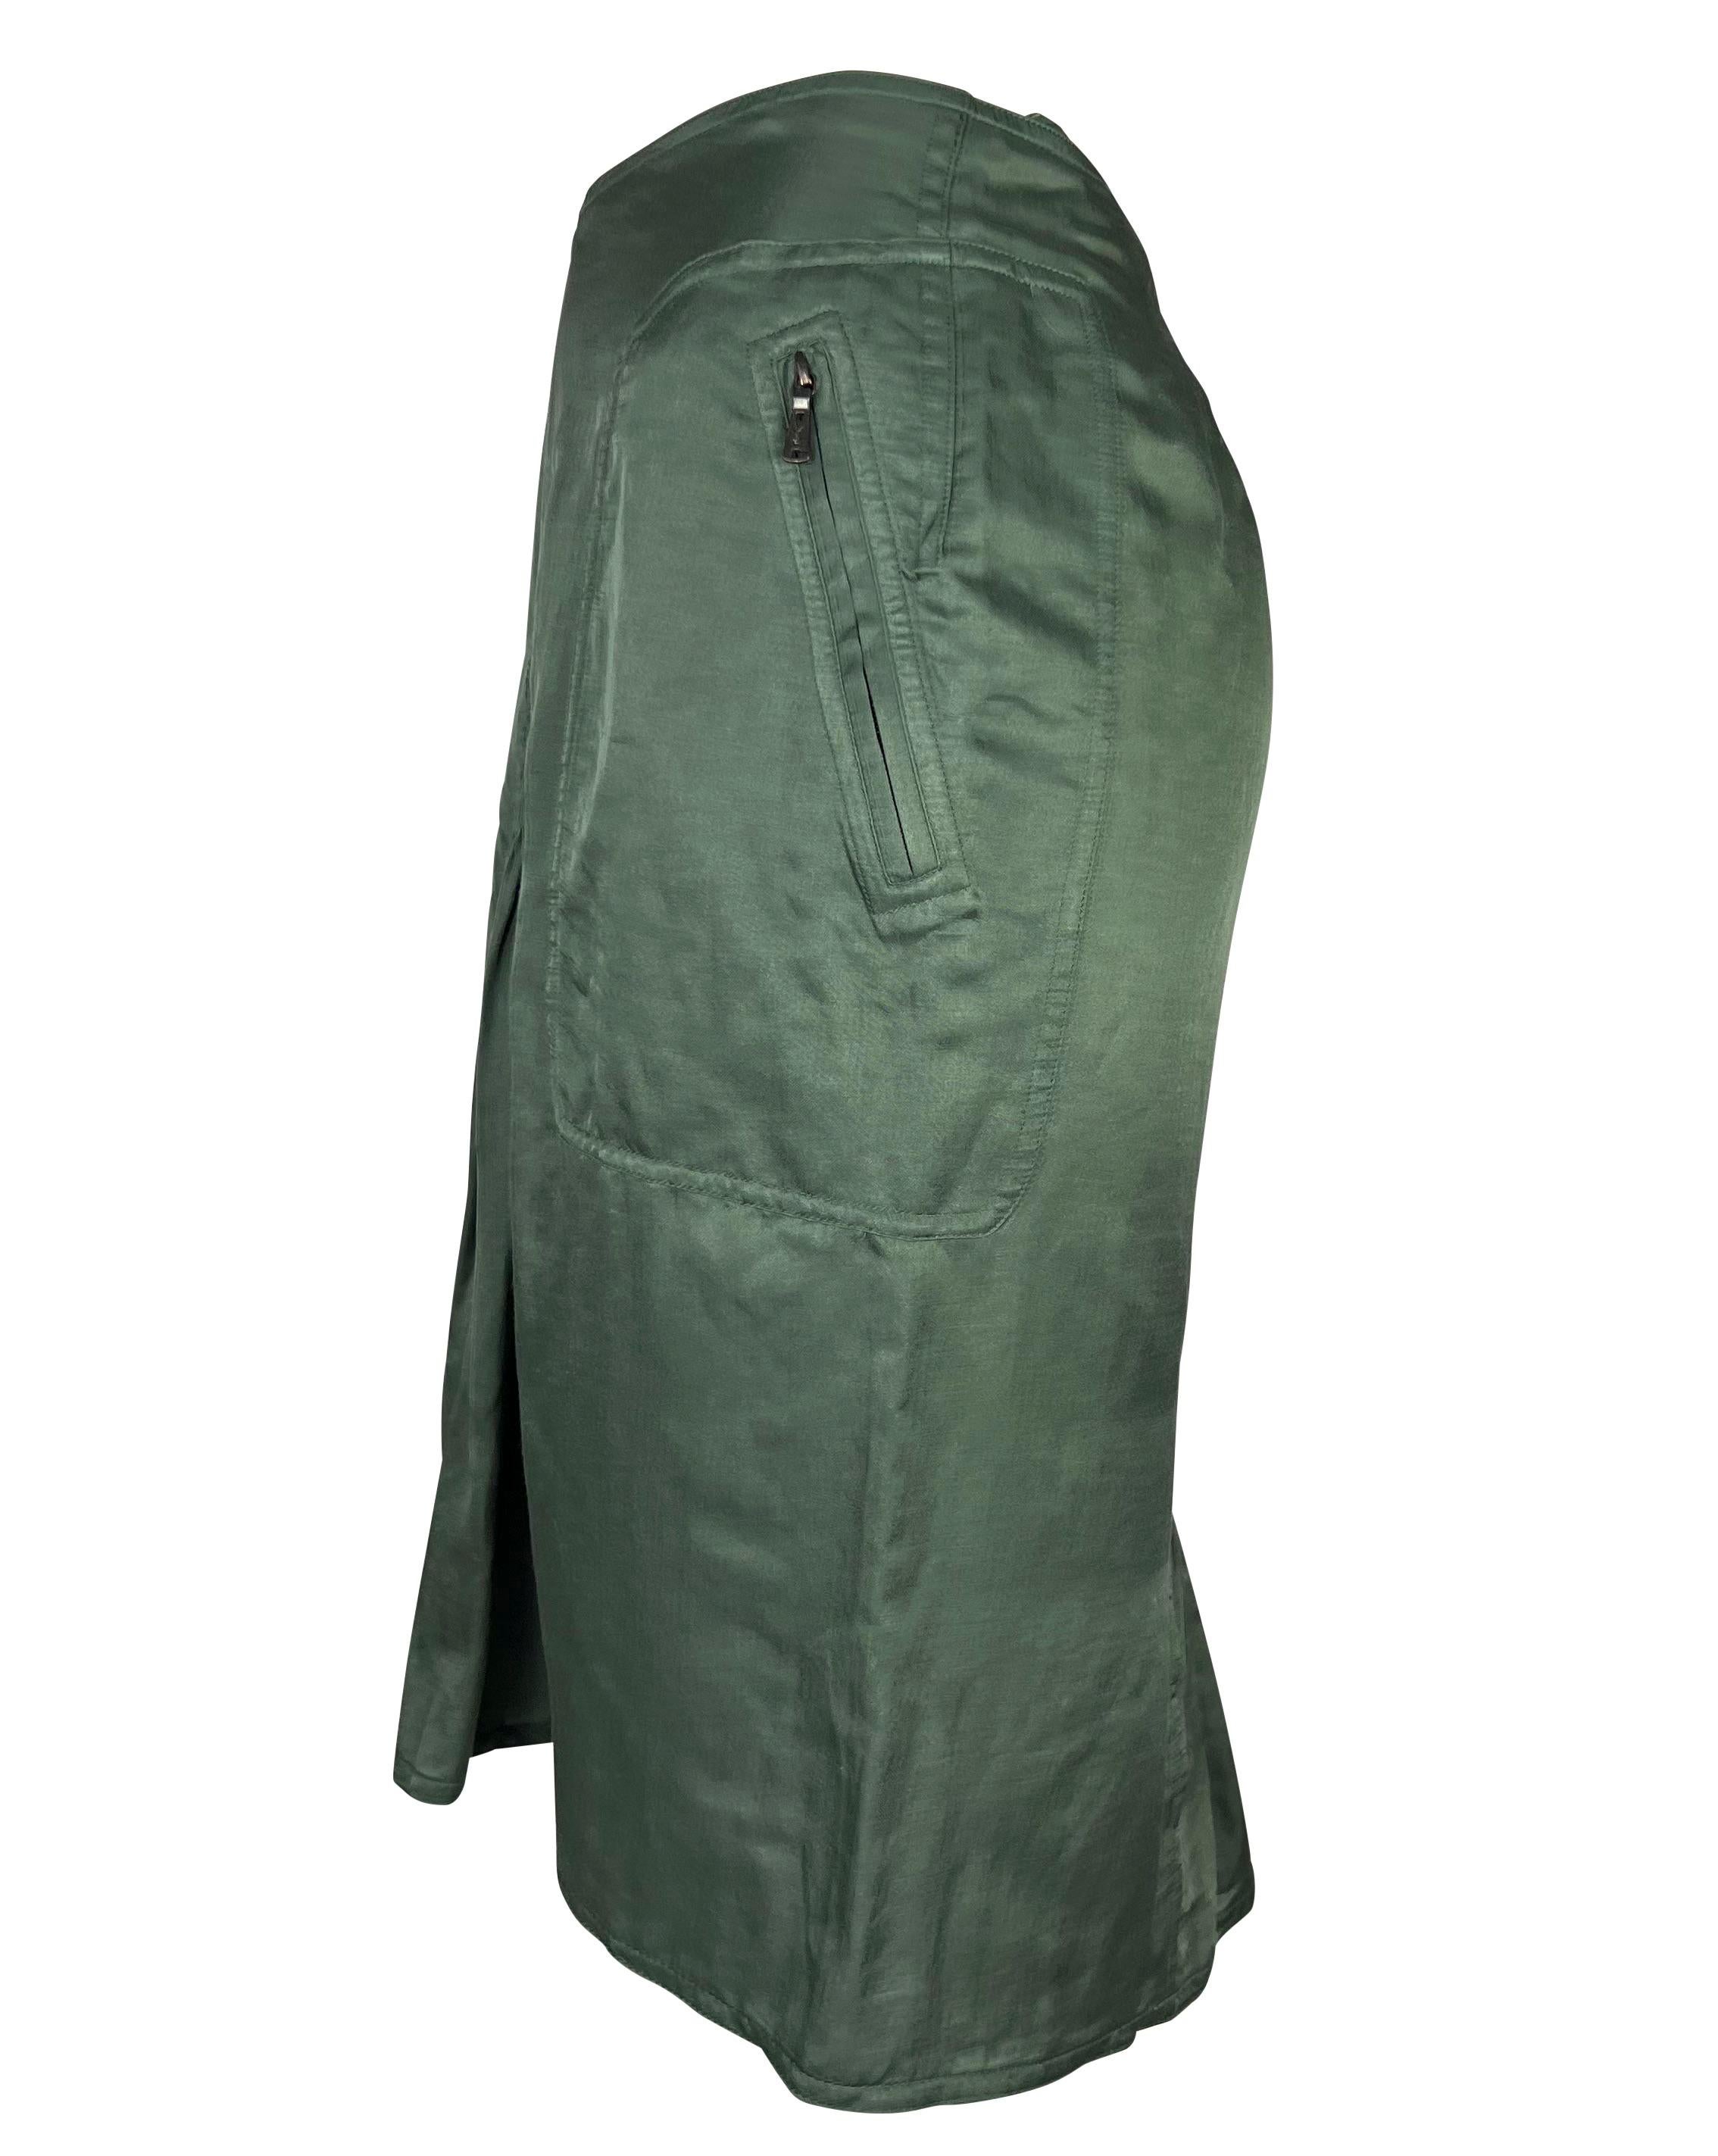 Black S/S 2003 Yves Saint Laurent by Tom Ford Olive Green Ruched Stretch Skirt For Sale